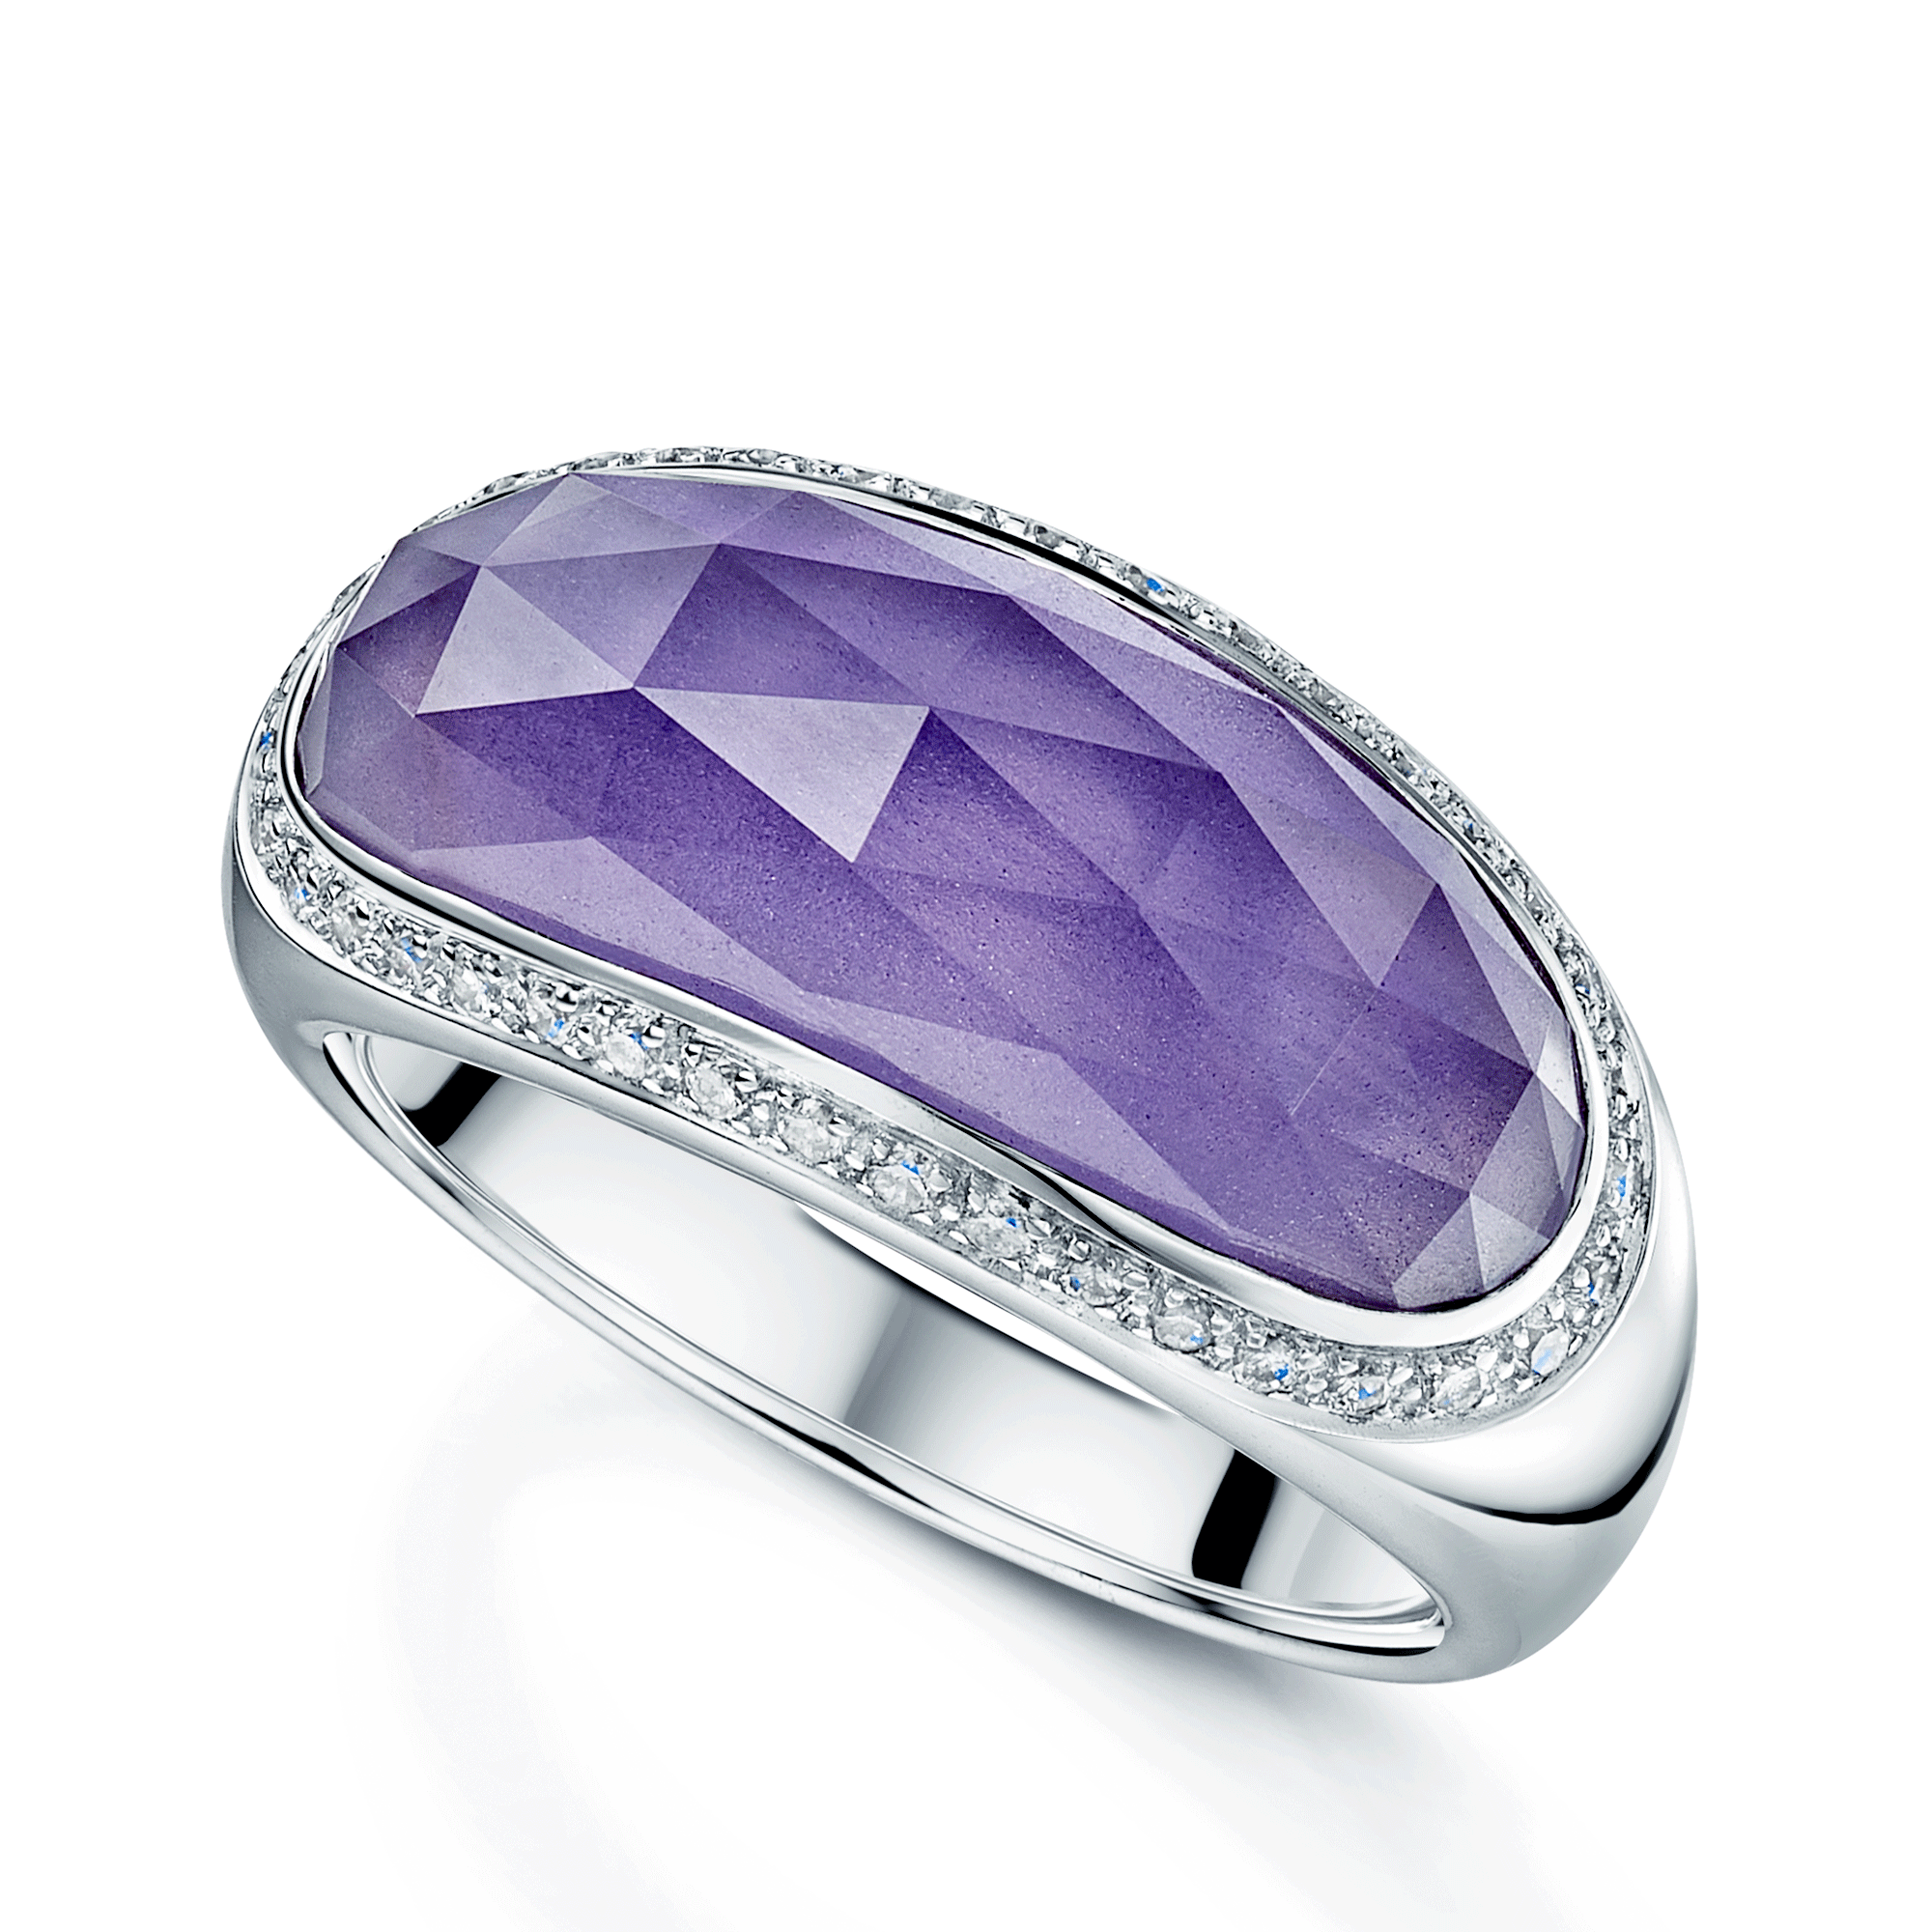 18ct White Gold Elongated Faceted Amethyst And Diamond Ring